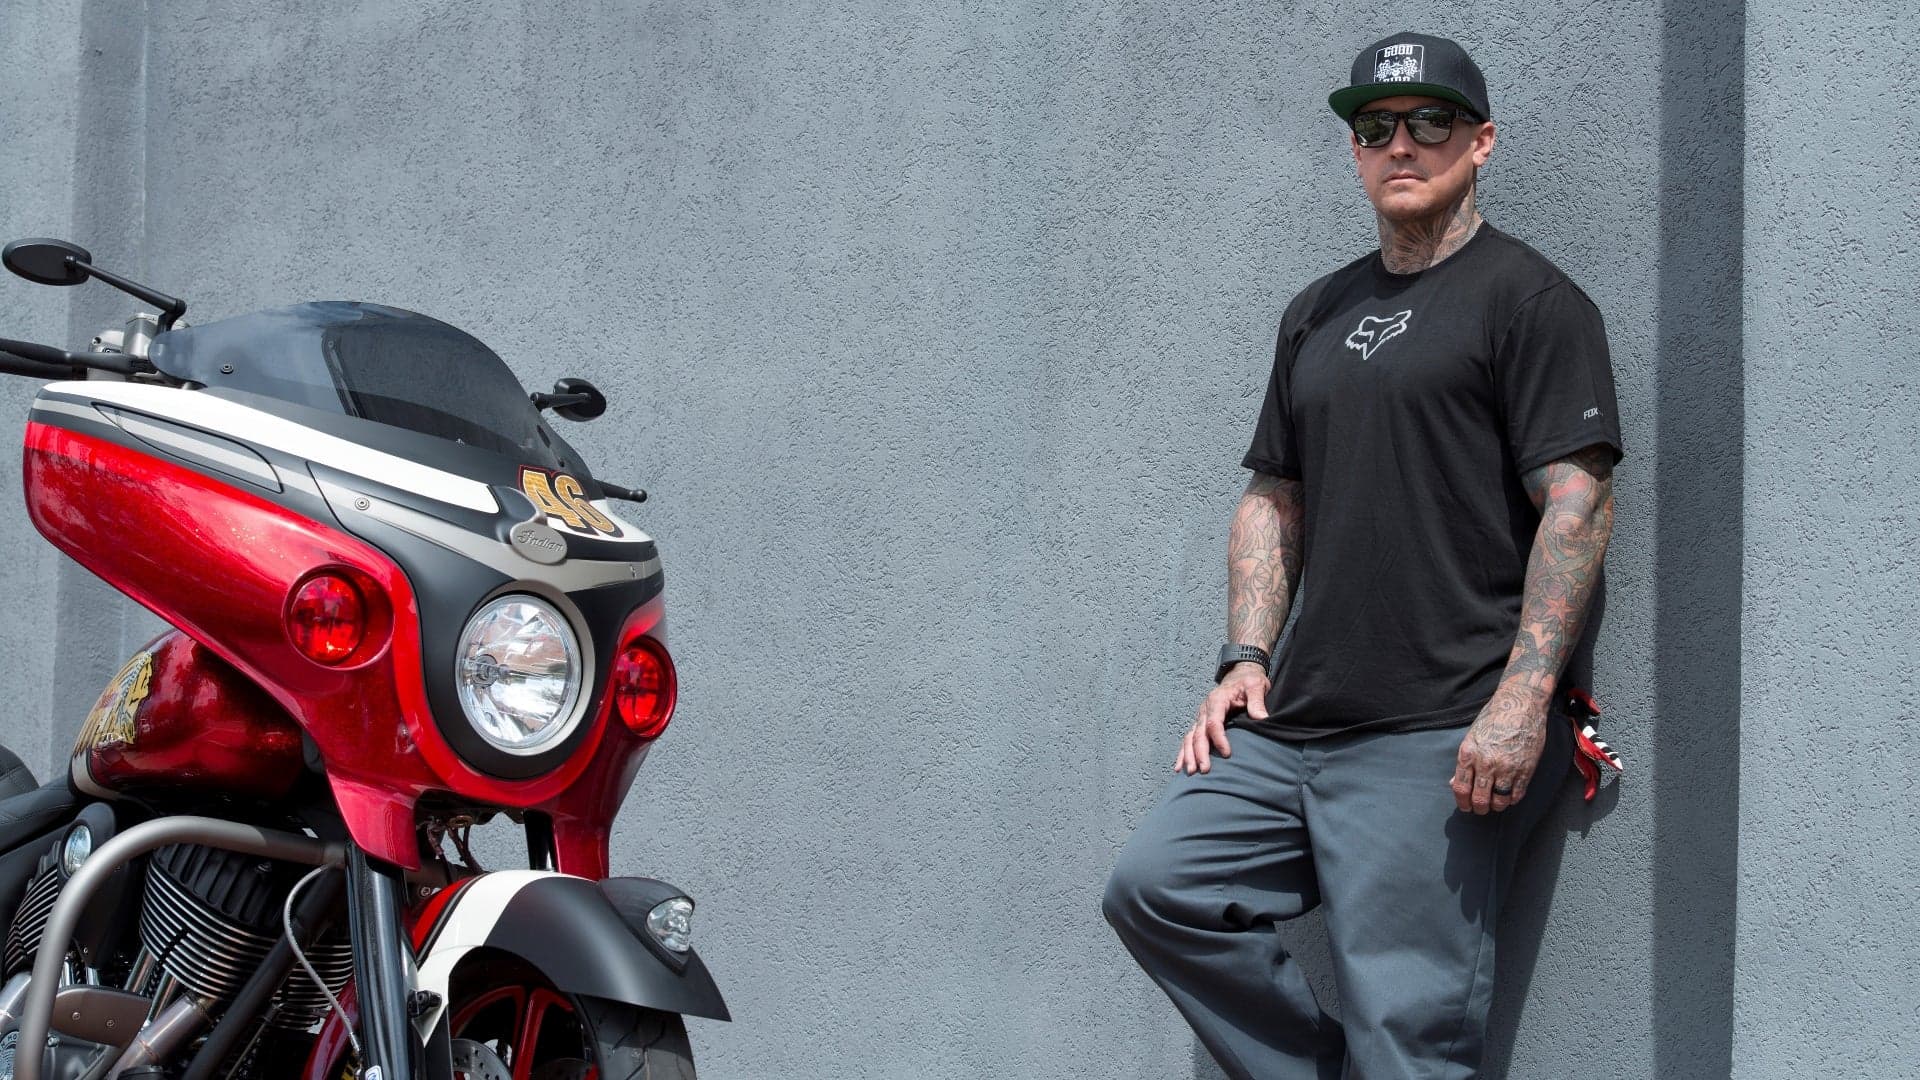 Indian Motorcycle Teams Up with Carey Hart to Support Veterans on Armed Forces Day